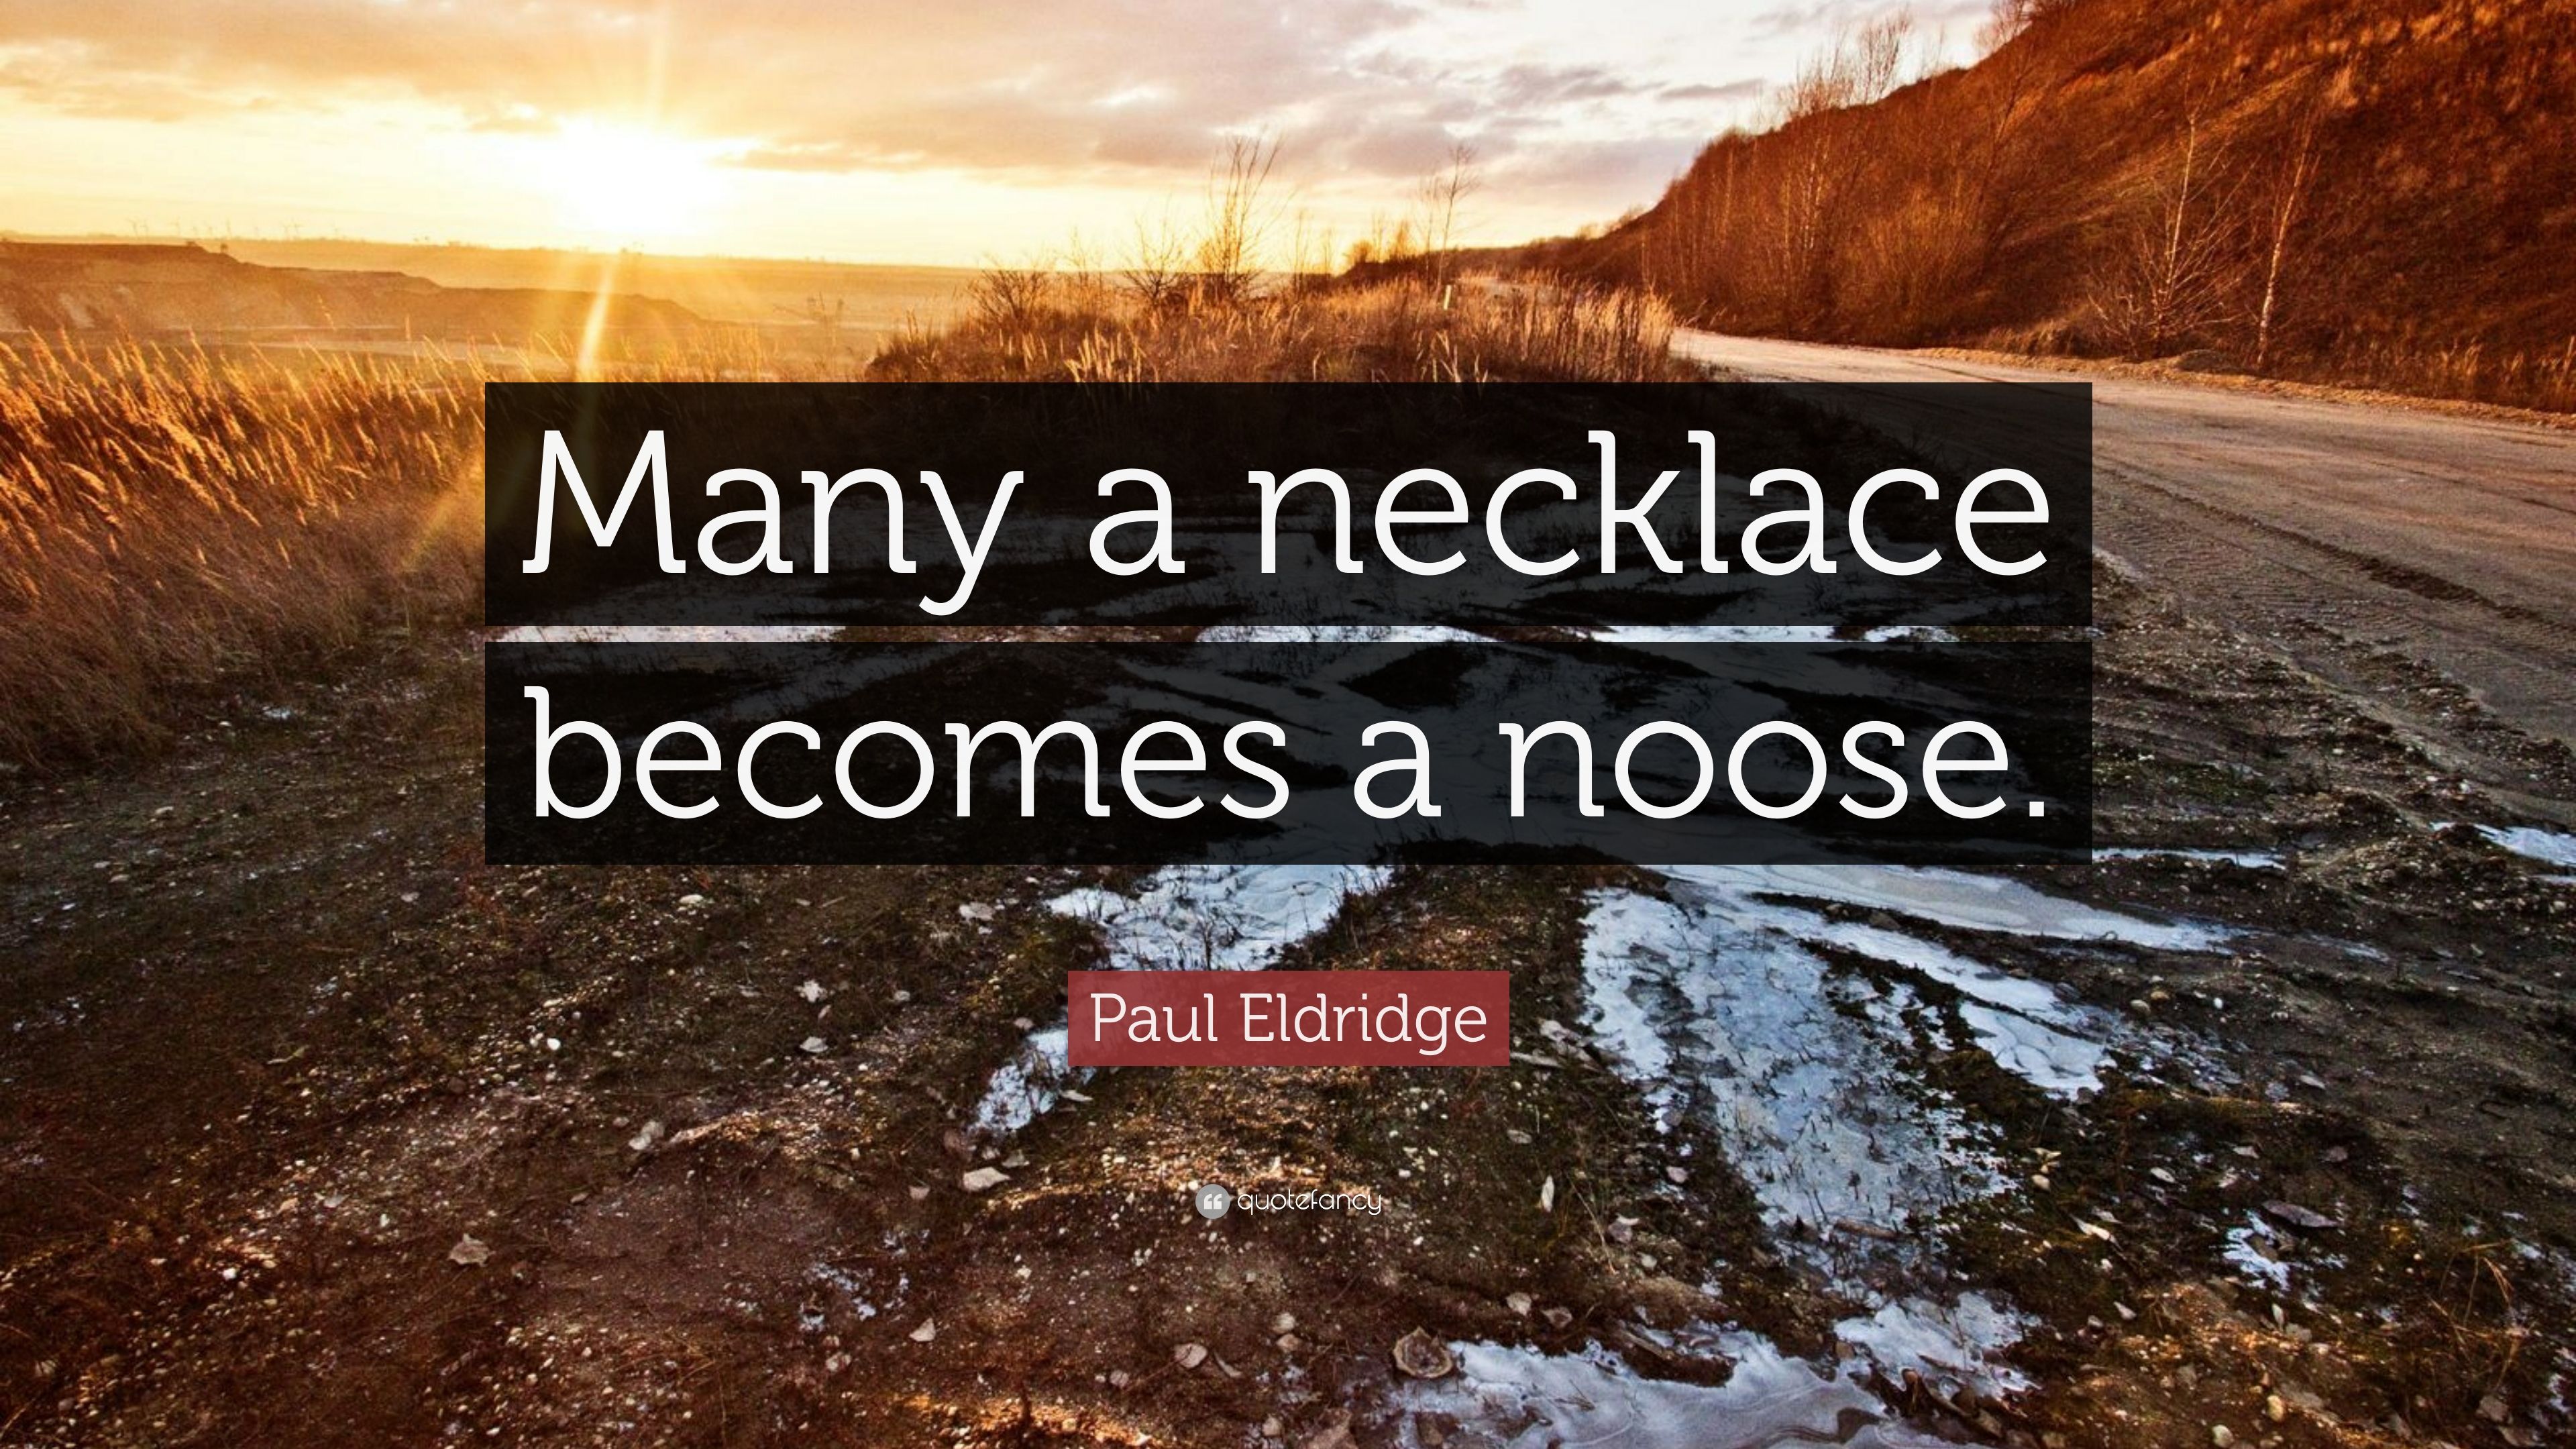 Paul Eldridge Quote: “Many a necklace becomes a noose.” 5